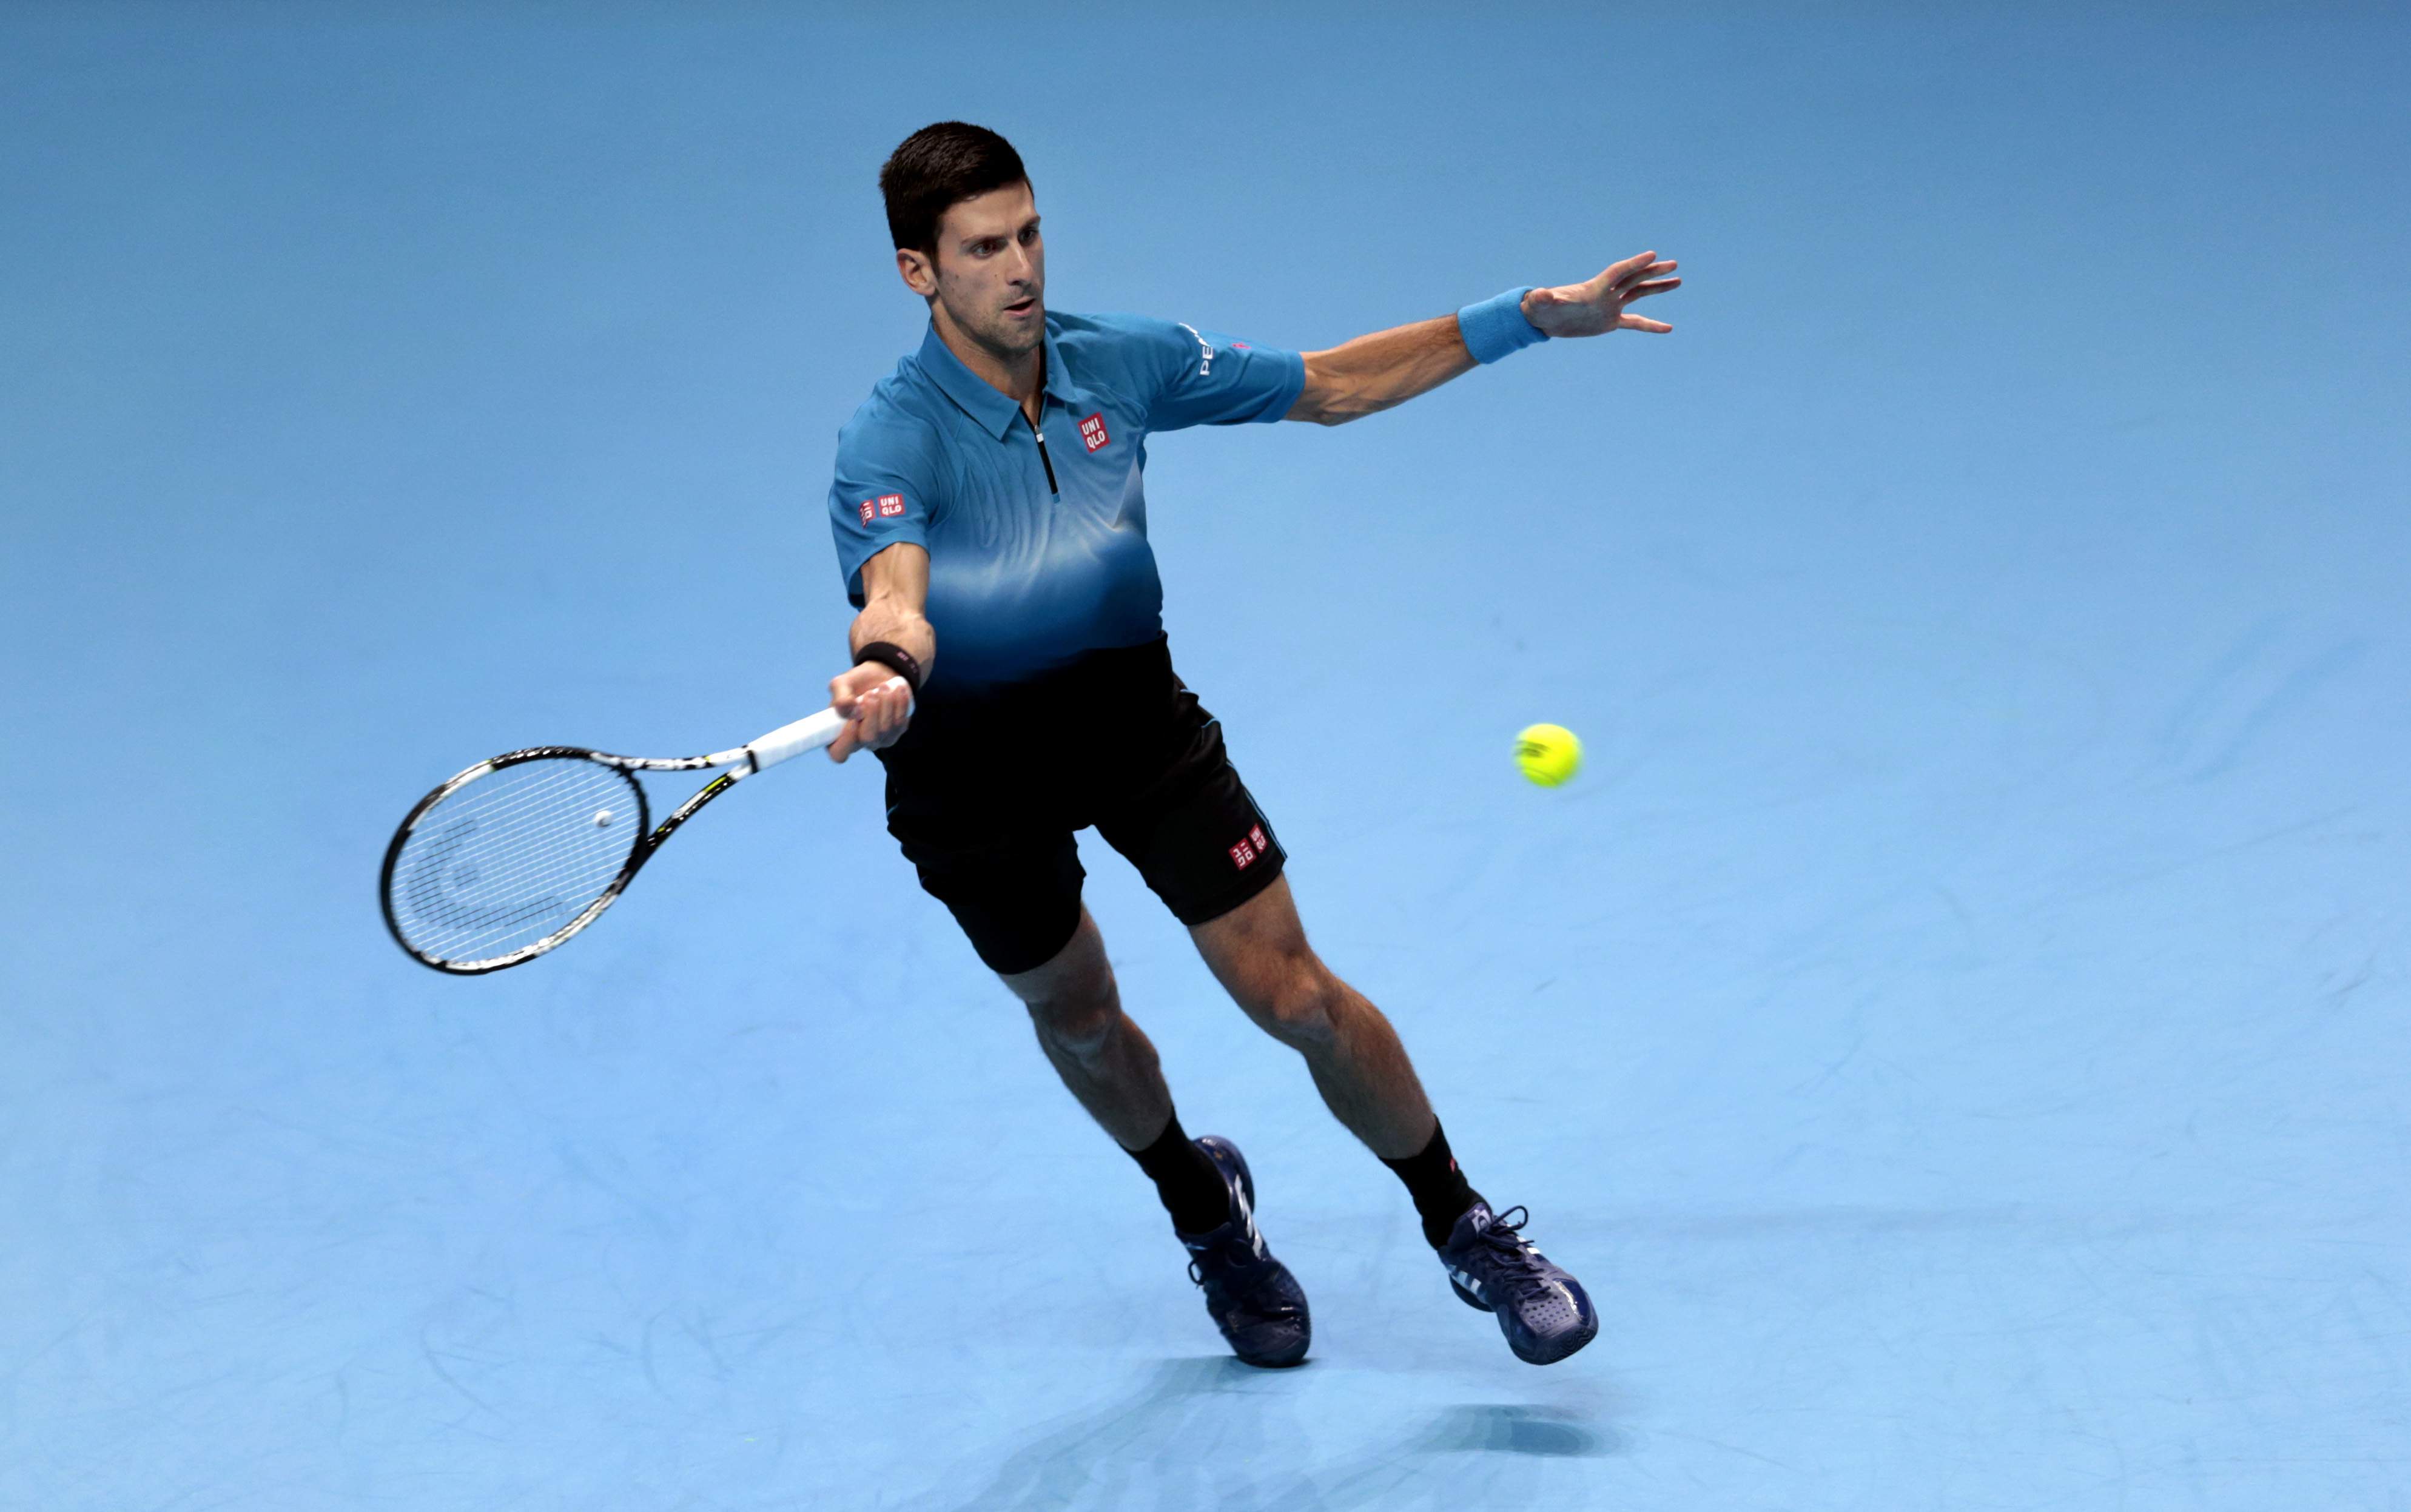 Tennis - Barclays ATP World Tour Finals - O2 Arena, London - 19/11/15 Men's Singles -  Serbia's Novak Djokovic during his match against Czech Republic's Tomas Berdych Reuters / Suzanne Plunkett Livepic EDITORIAL USE ONLY.